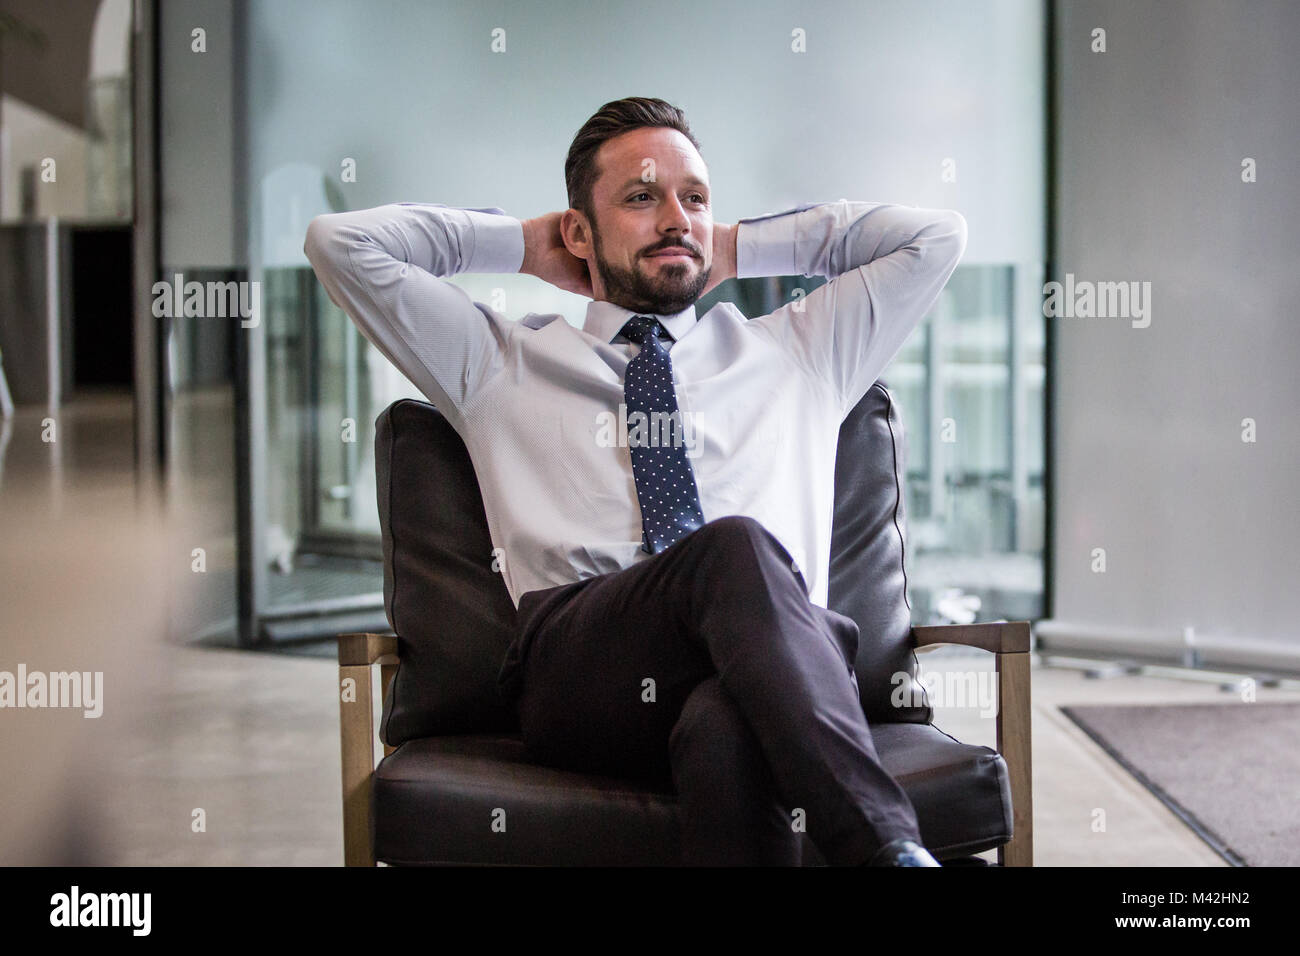 Successful businessman leaning back in chair Stock Photo